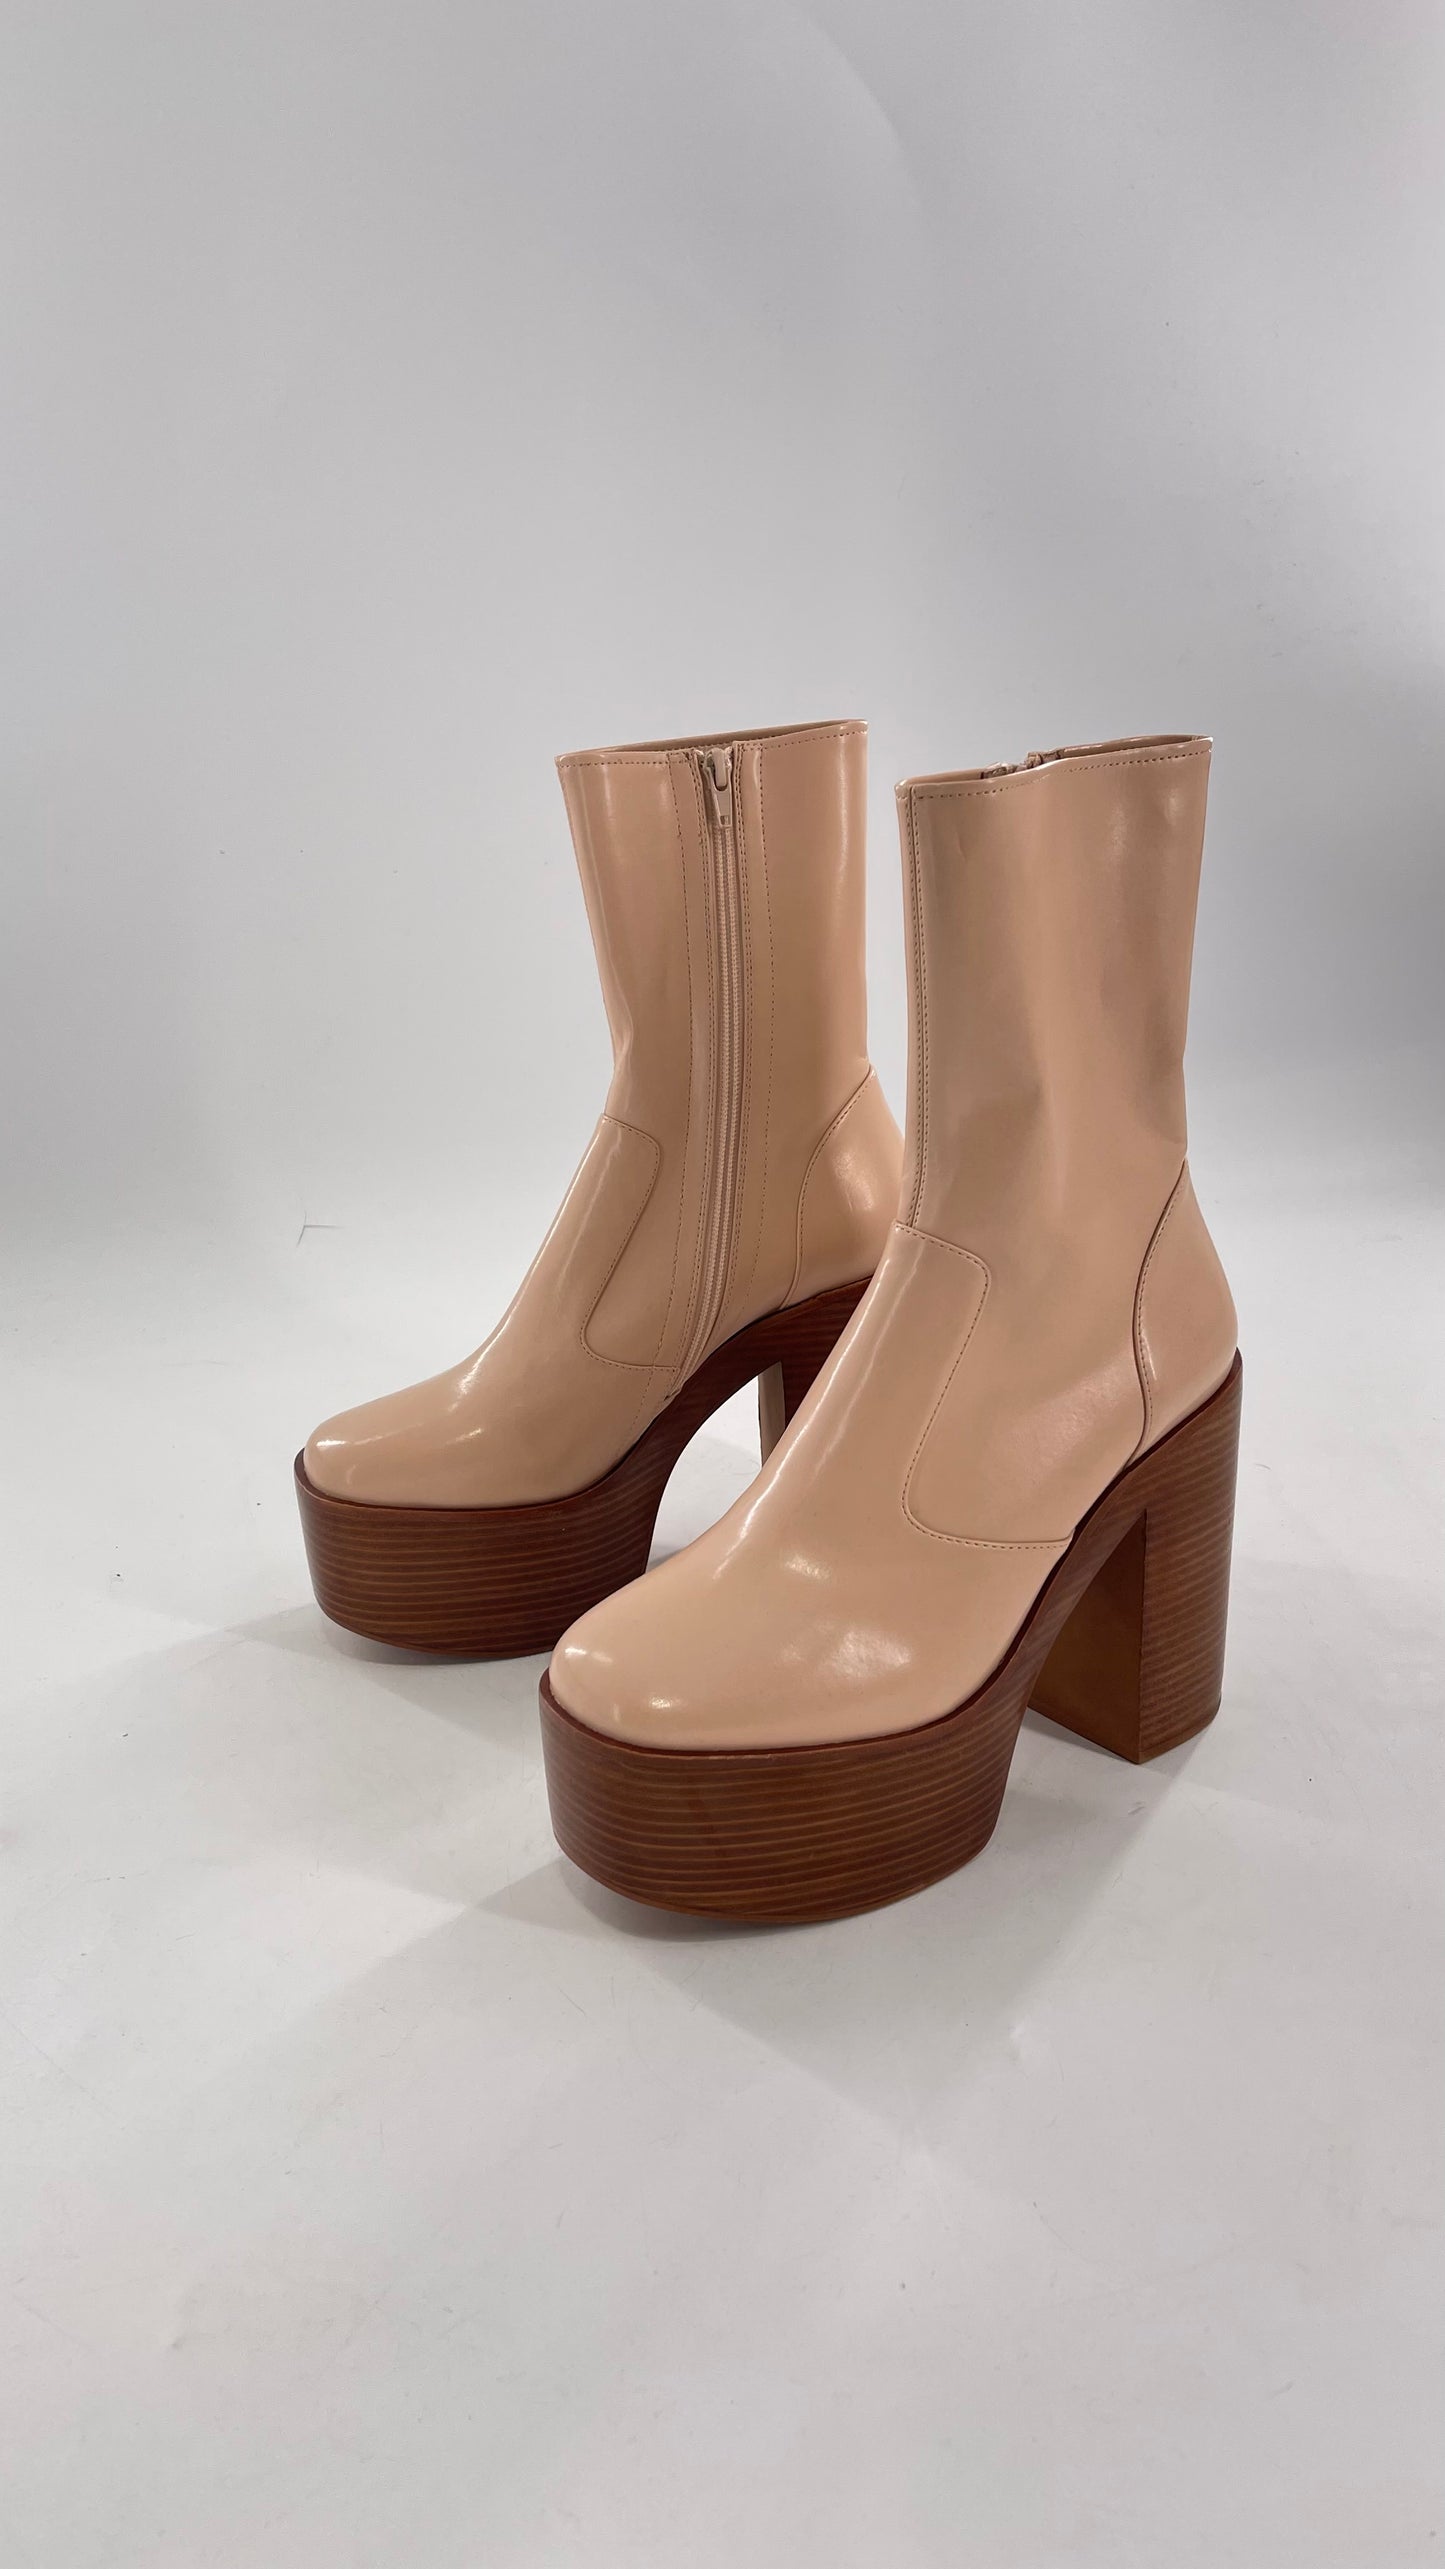 Free People X Jeffrey Campbell Mexique GoGo Boots • Beige Patent Boot with Wood Grain Chunky Block Heel and Platform  (9)